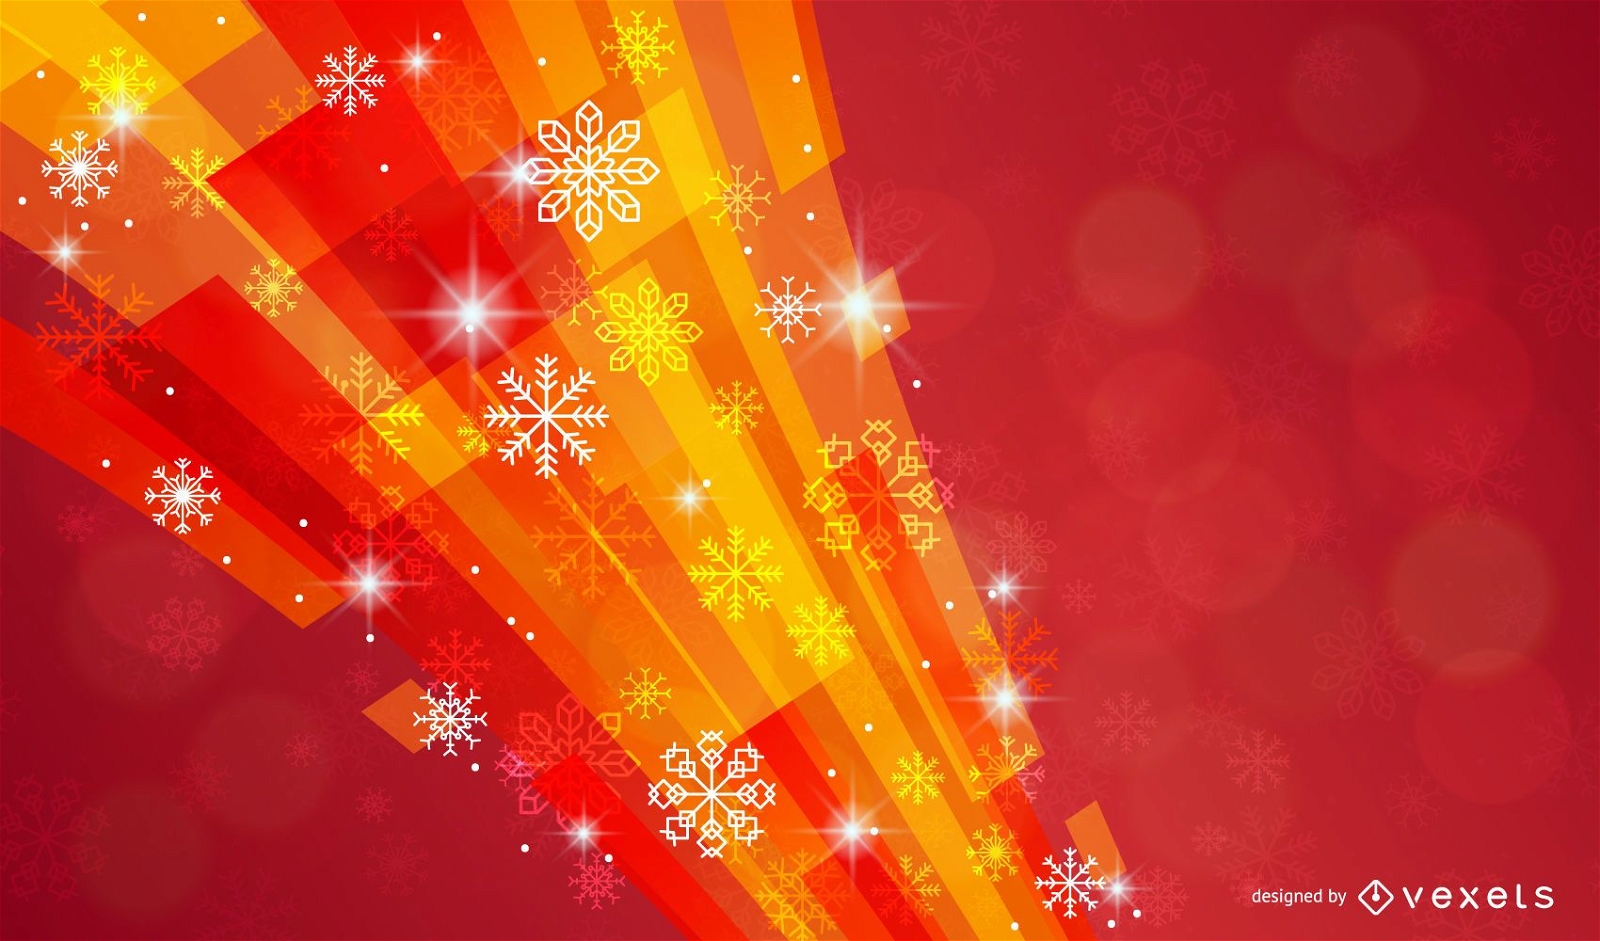 Christmas background with snowflakes and colorful shapes